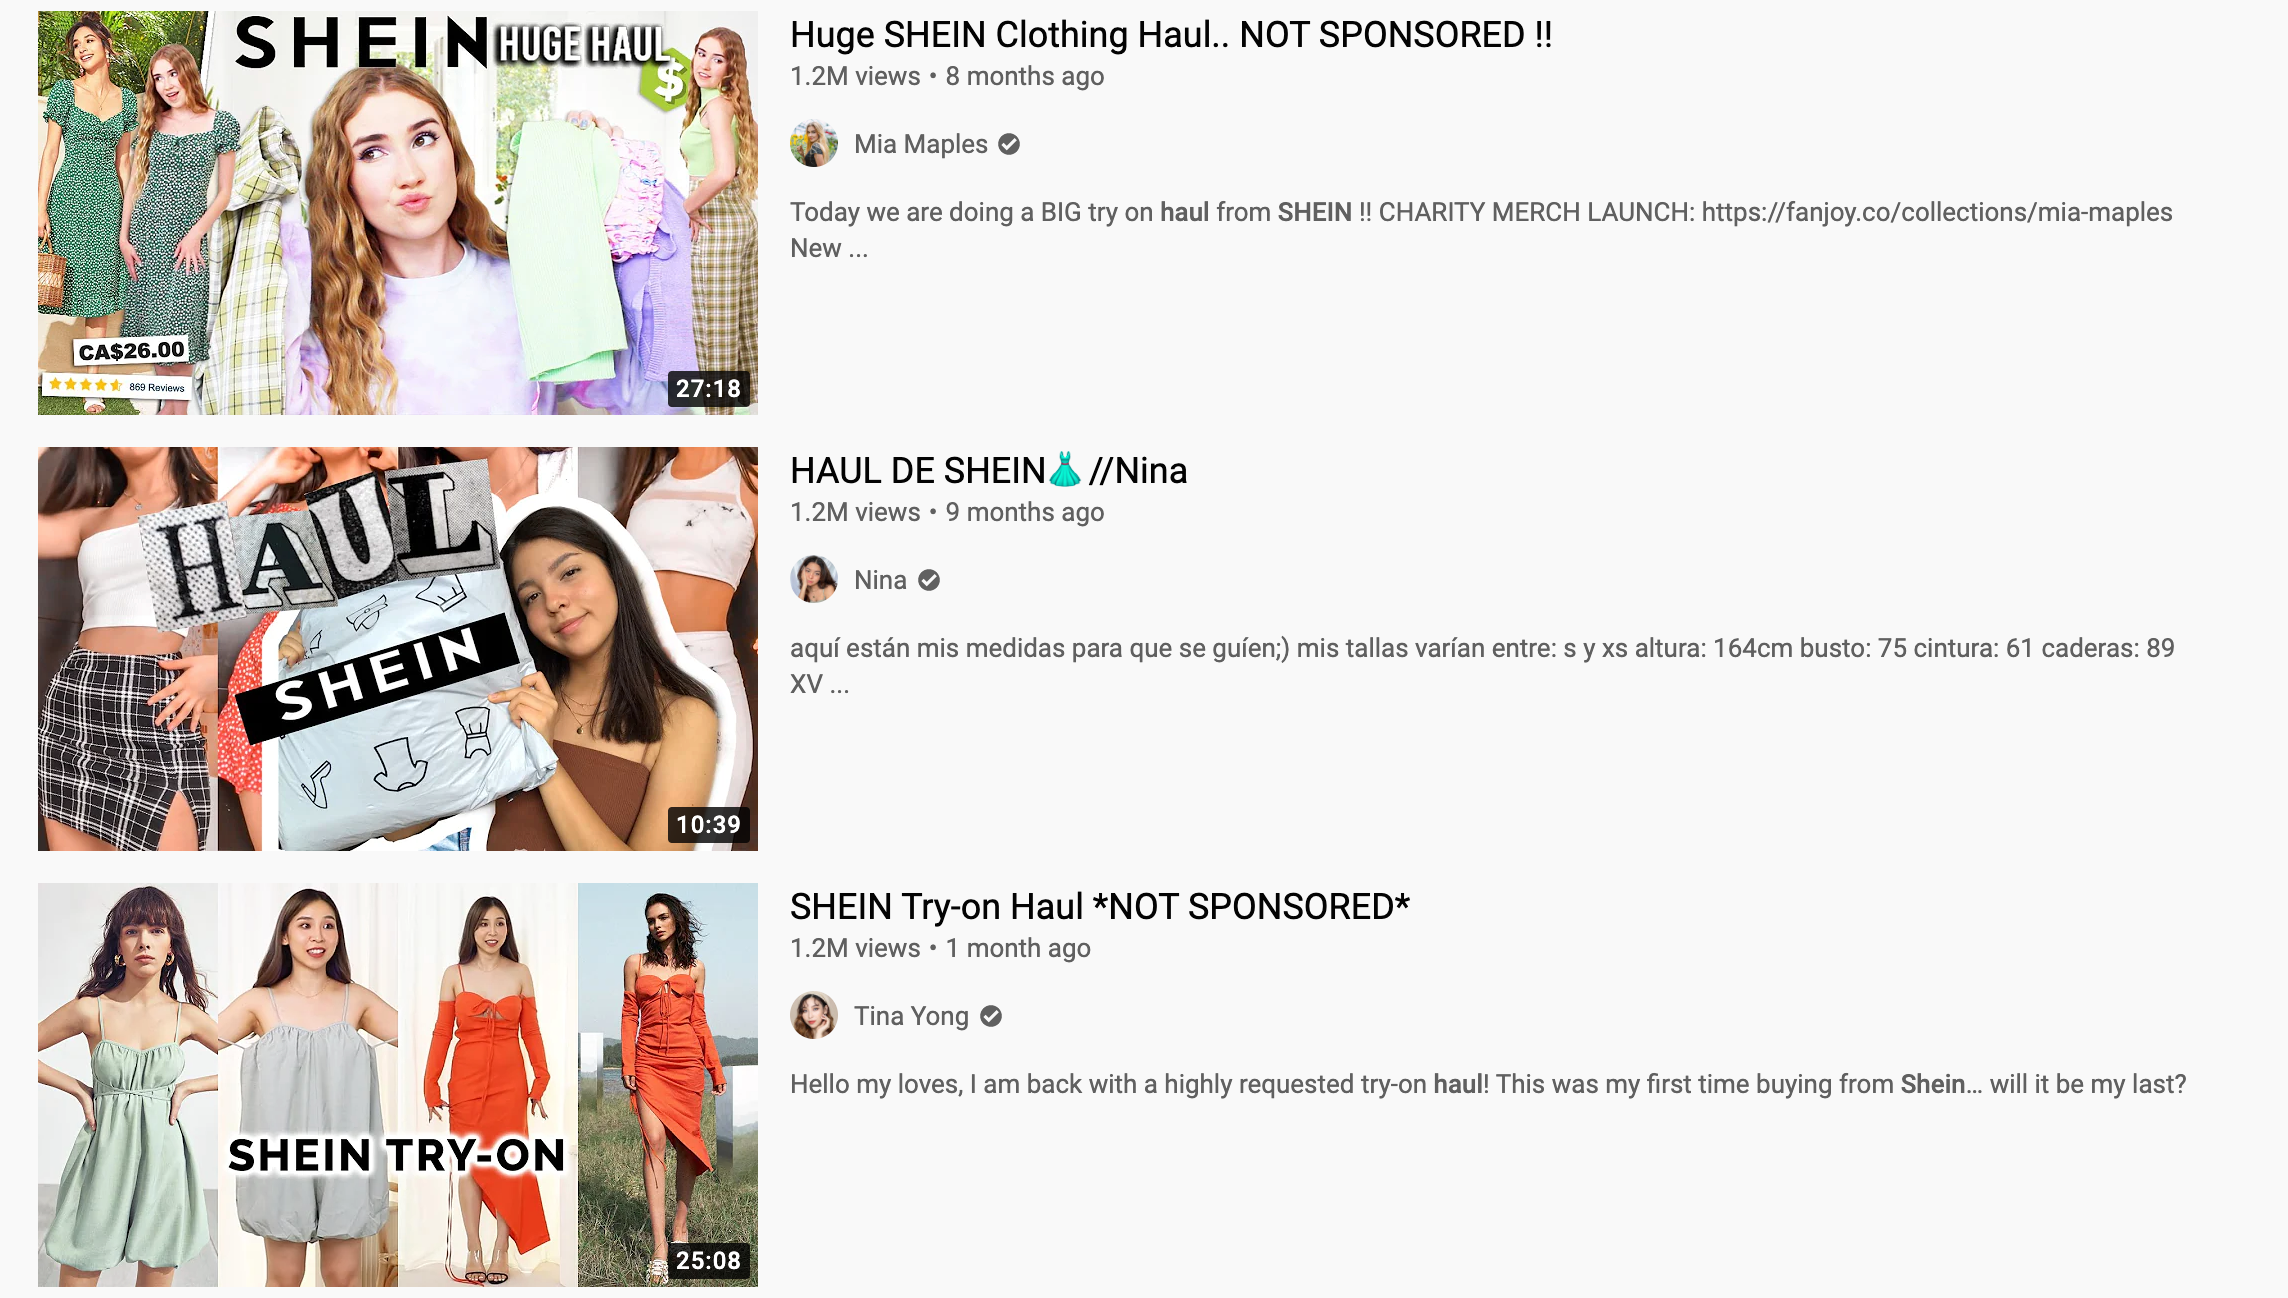 Shein sent American influencers to China. Social media users are